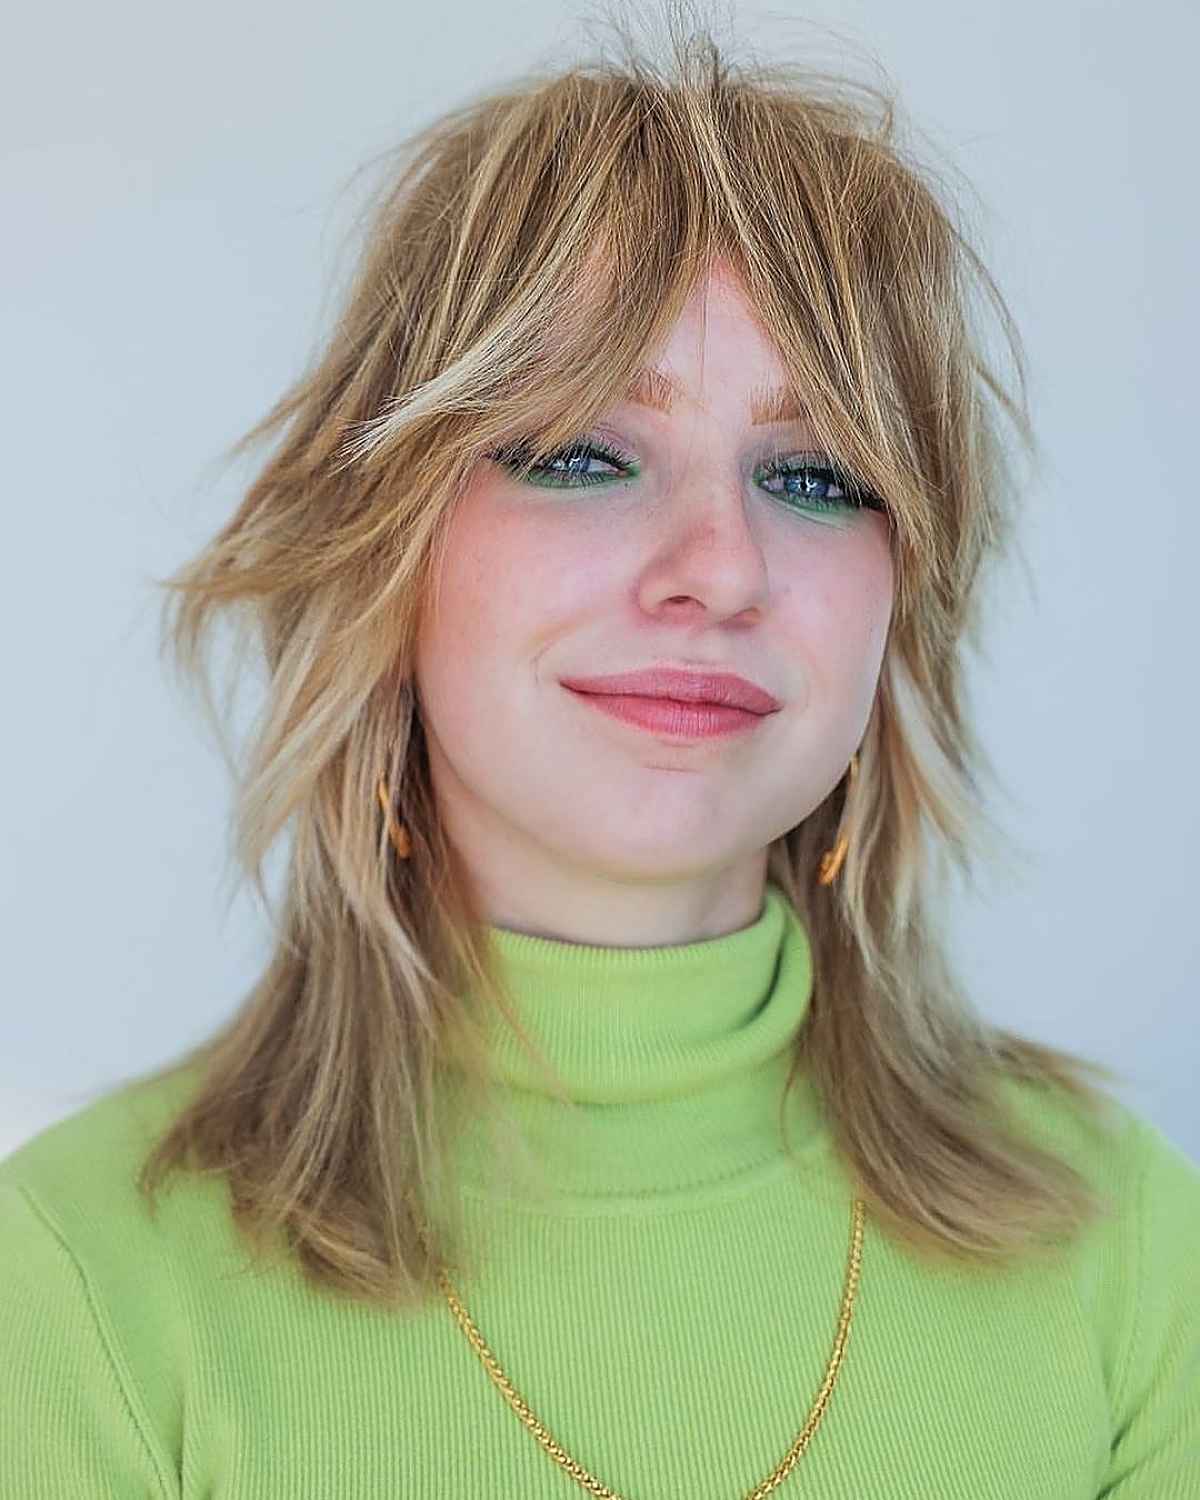 50 Low-Maintenance Shaggy Haircuts with Bangs for Busy &amp; Trendy Women